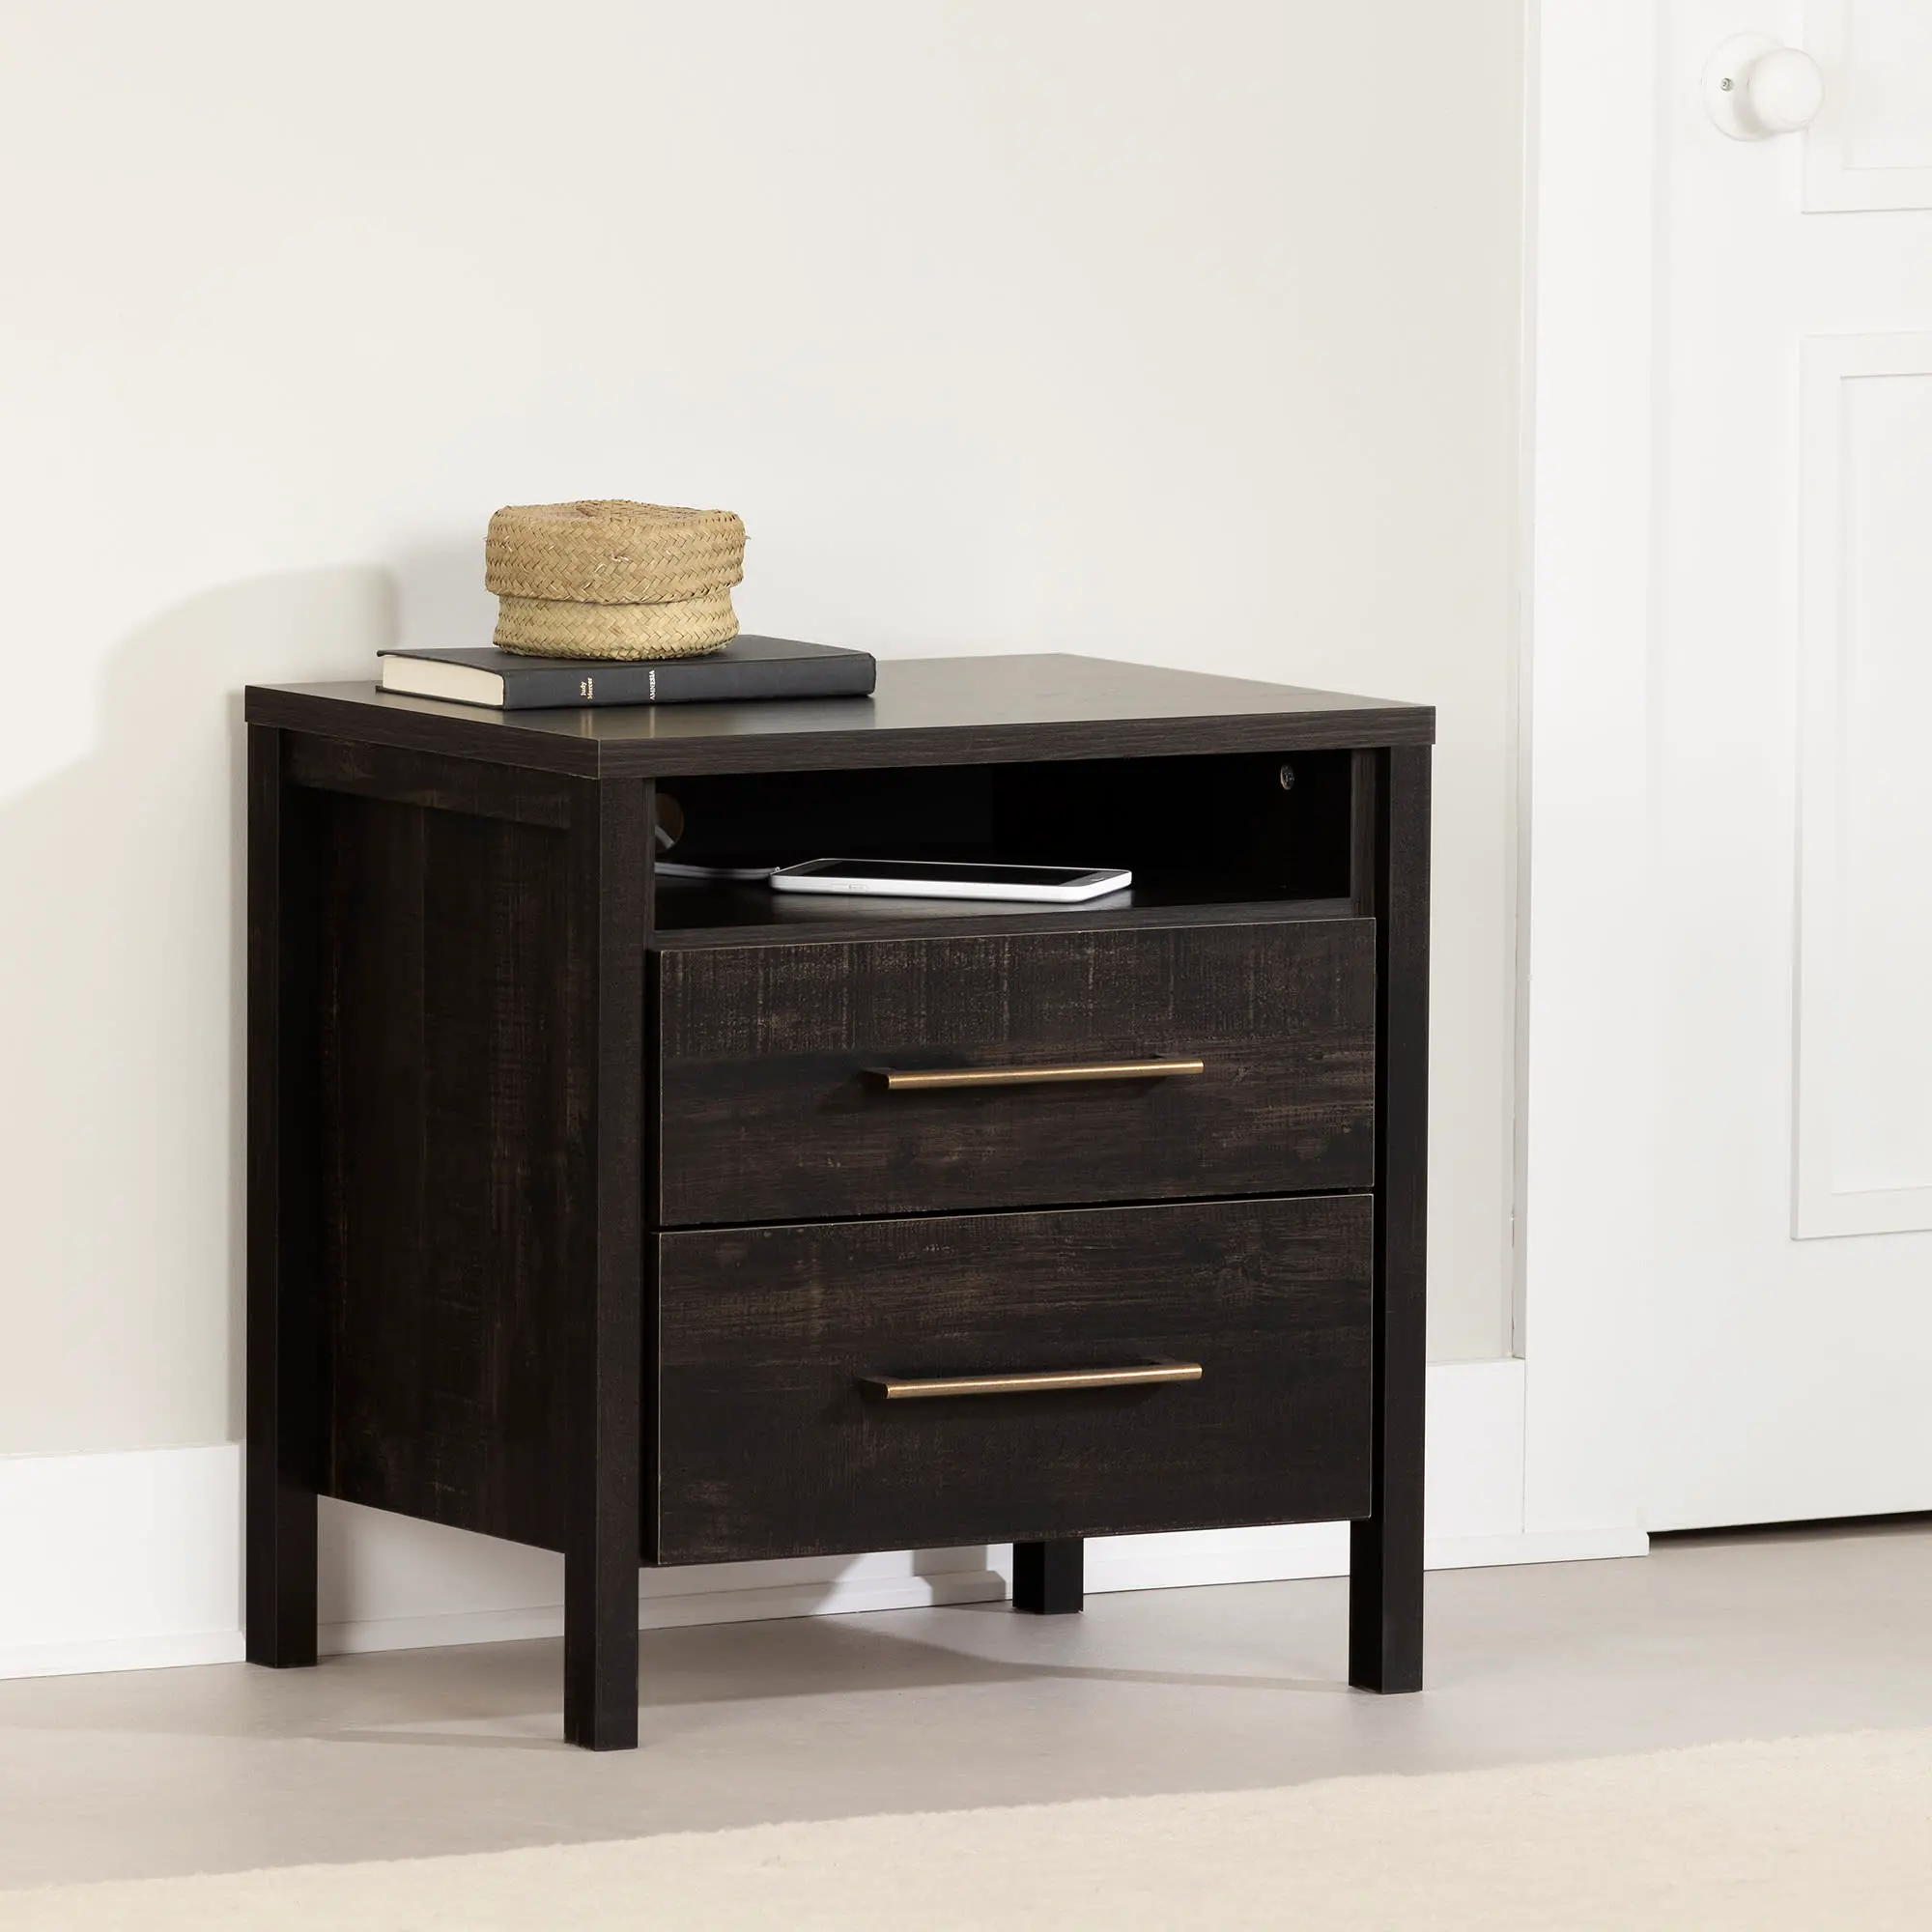 13559 Gravity Rubbed Black 2 Drawer Nightstand - South S sku 13559